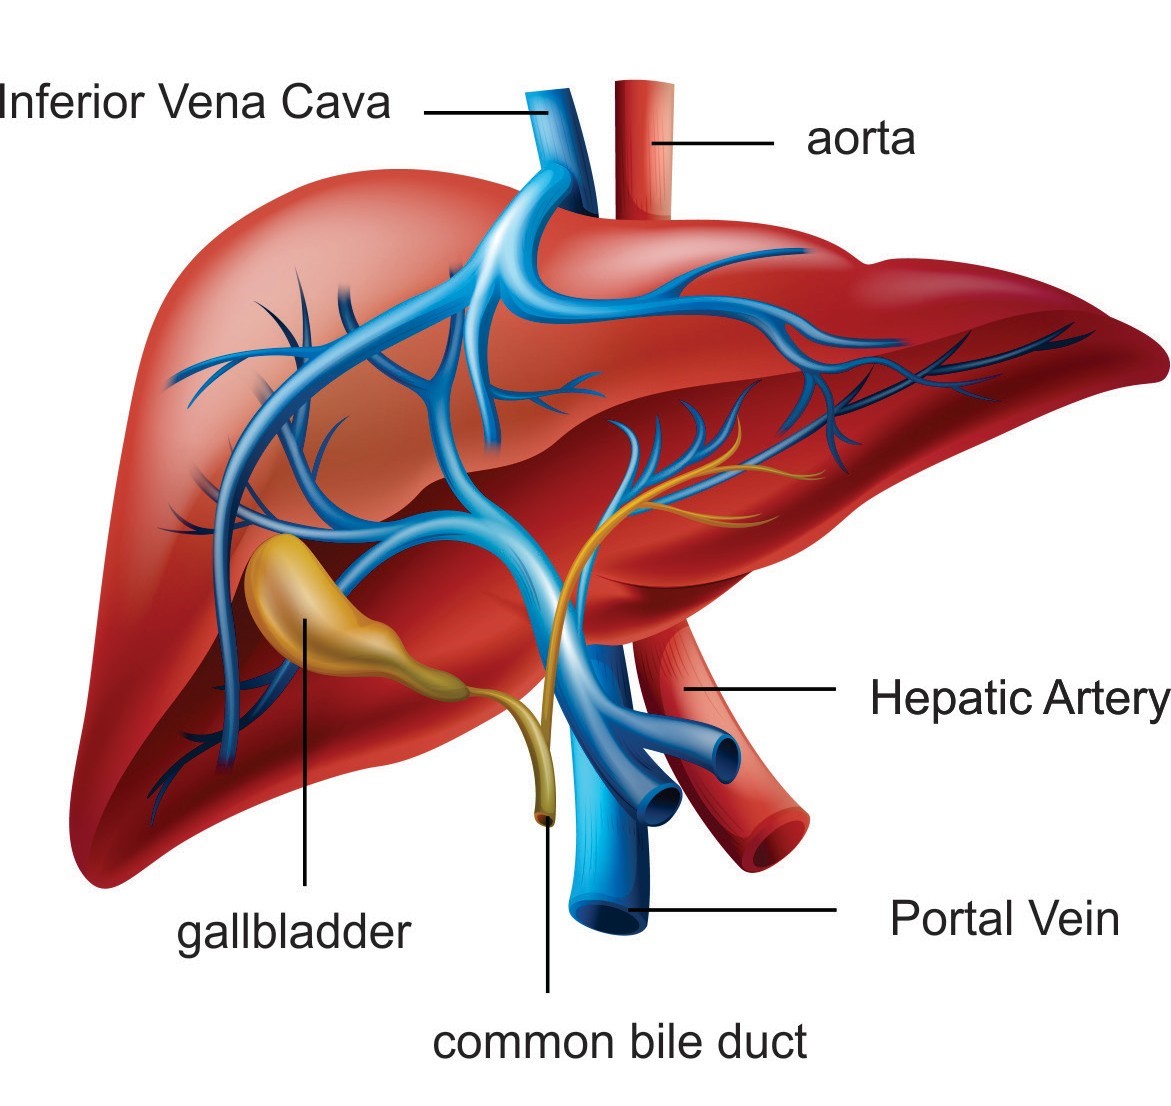 The blood vessels and bile ducts of the liver